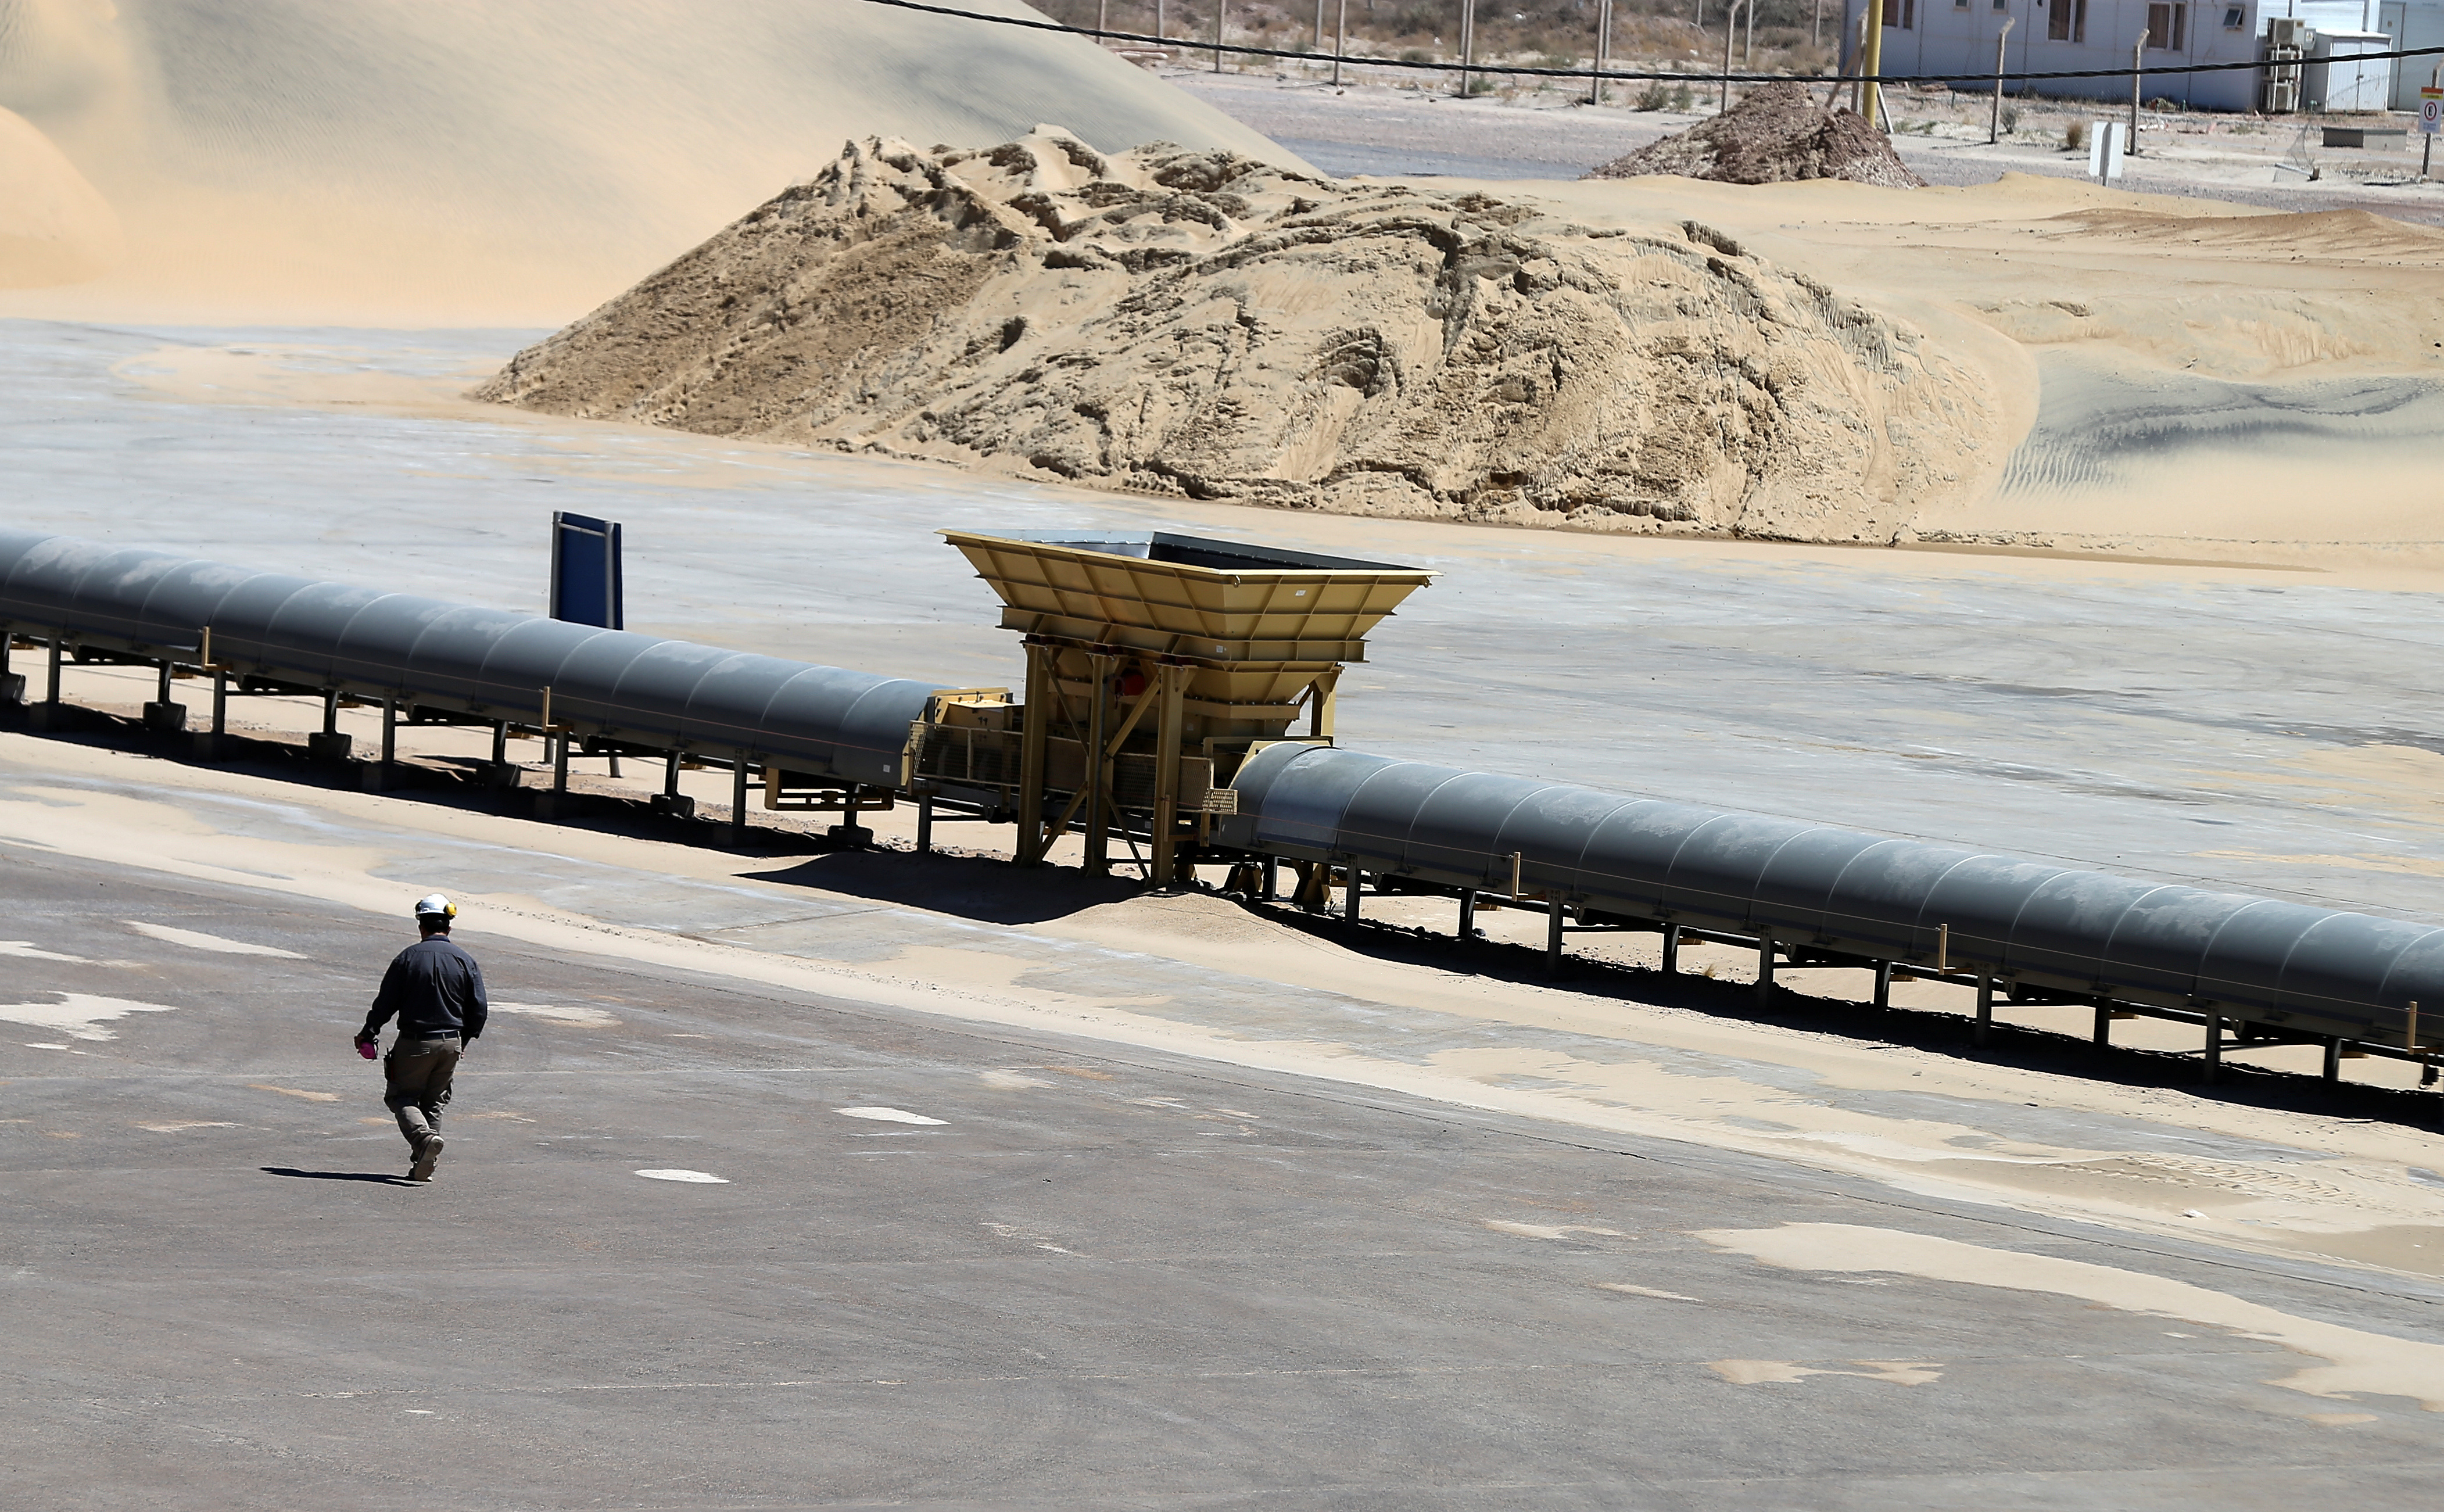 A worker walks near a pile of sand at Vaca Muerta shale oil and gas drilling, in the Patagonian province of Neuquen